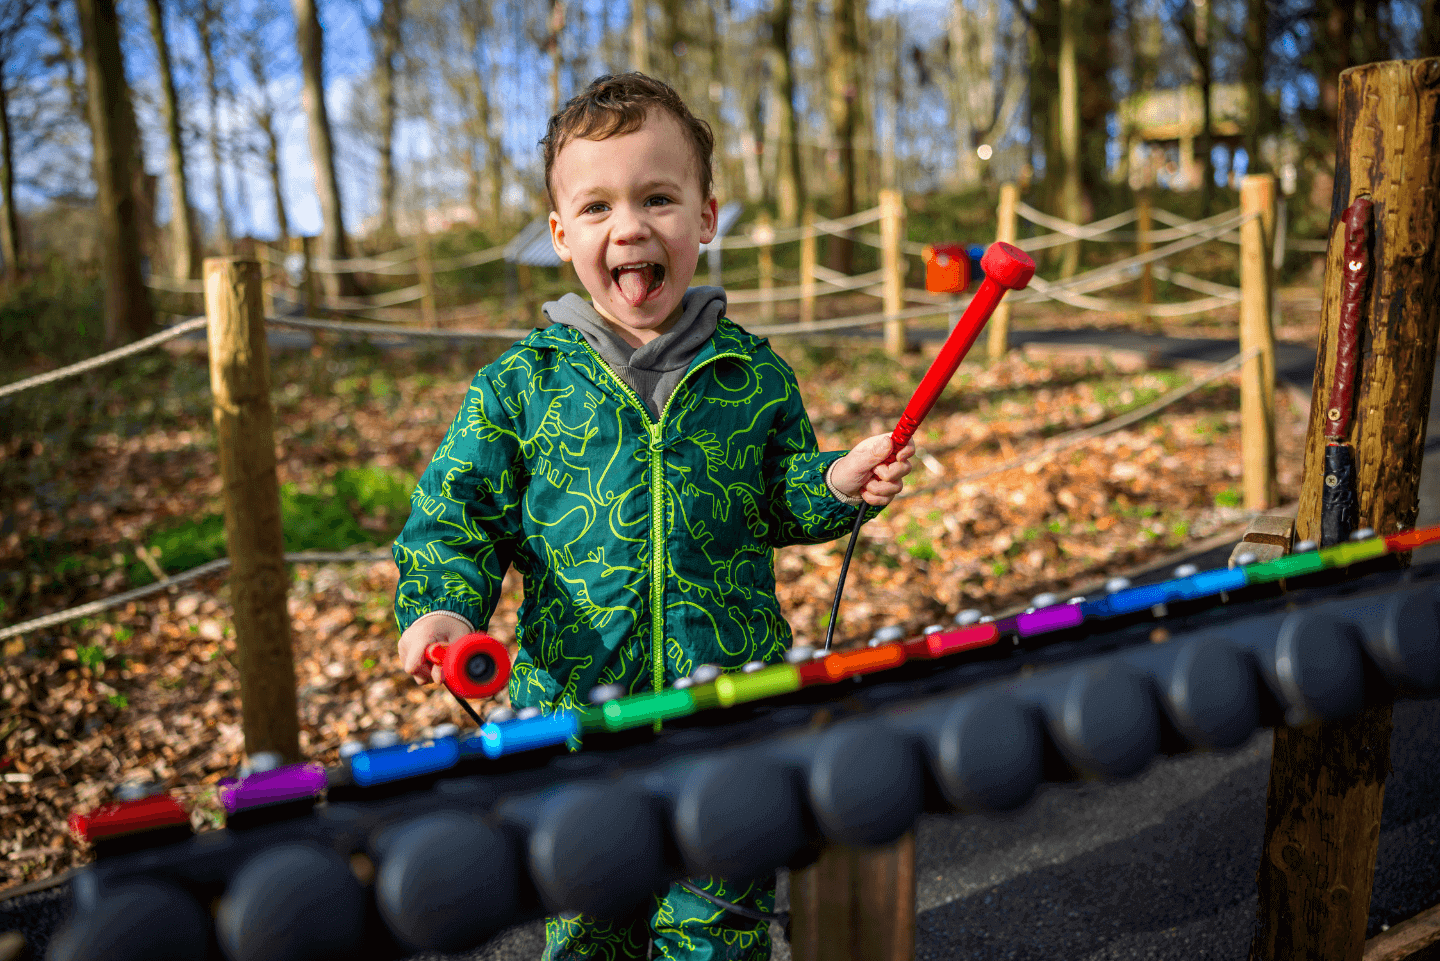 Young child happily playing in Stockeld Park's outdoor playgrounds